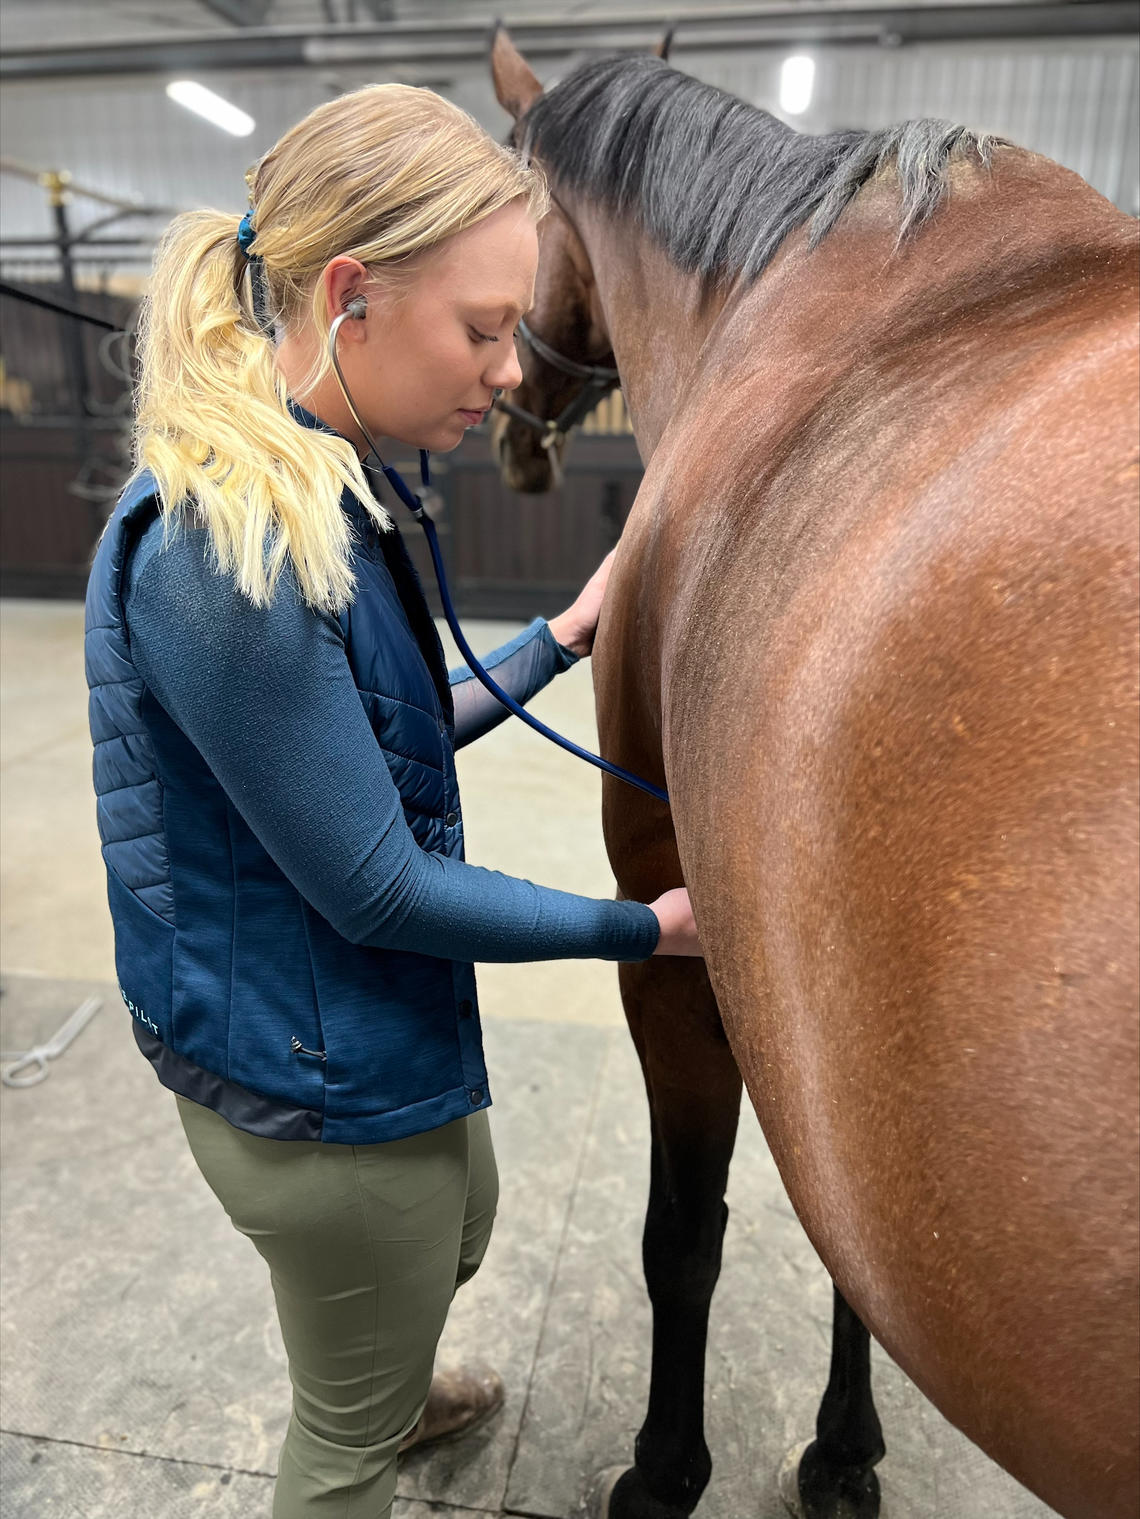 Nicole Phillips tends to a horse during fourth year rotations at TD Equine